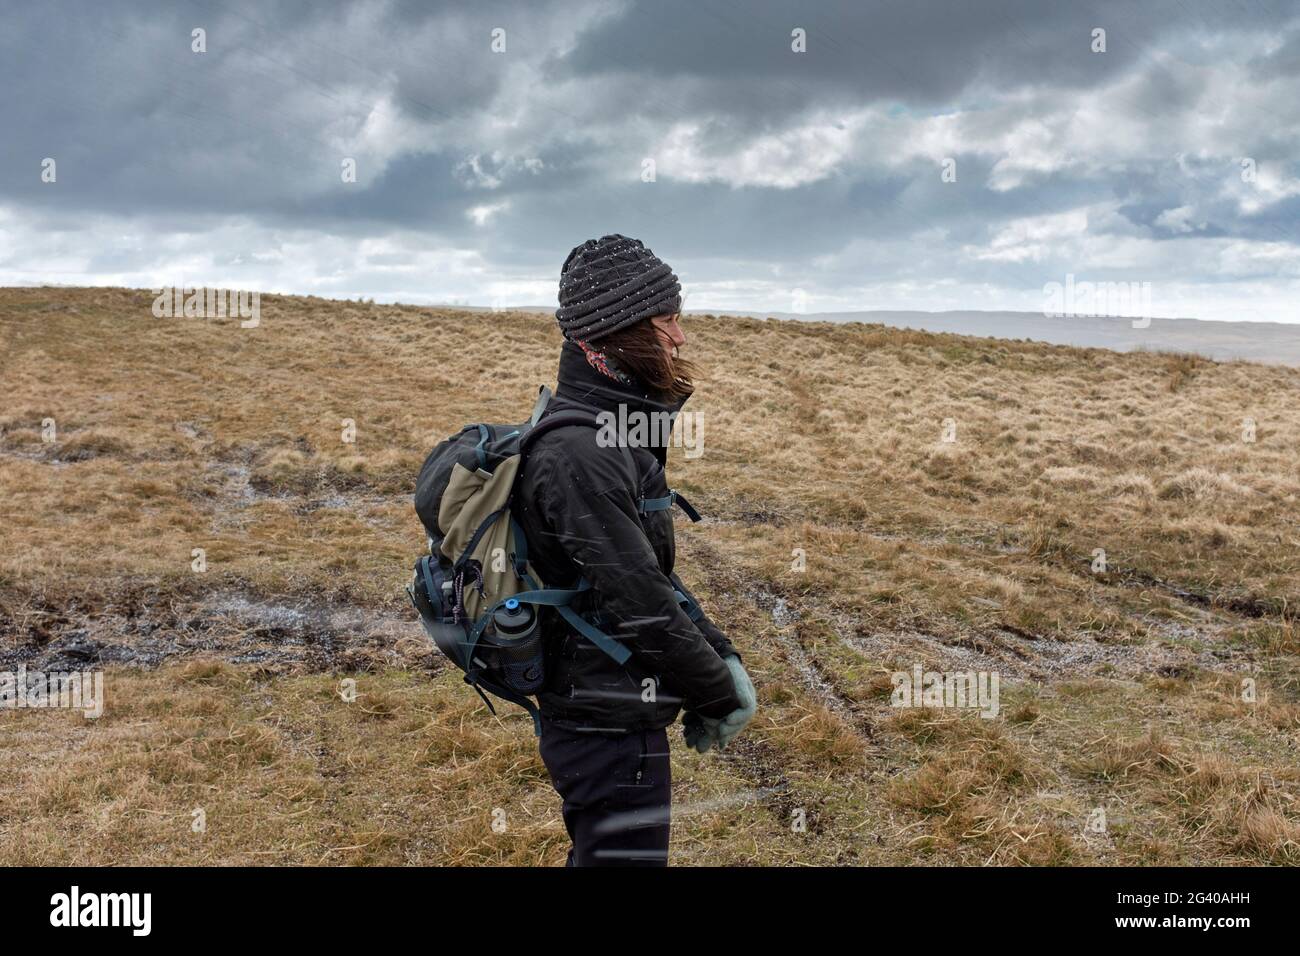 Woman hillwalking in a hail storm in Wales. Stock Photo